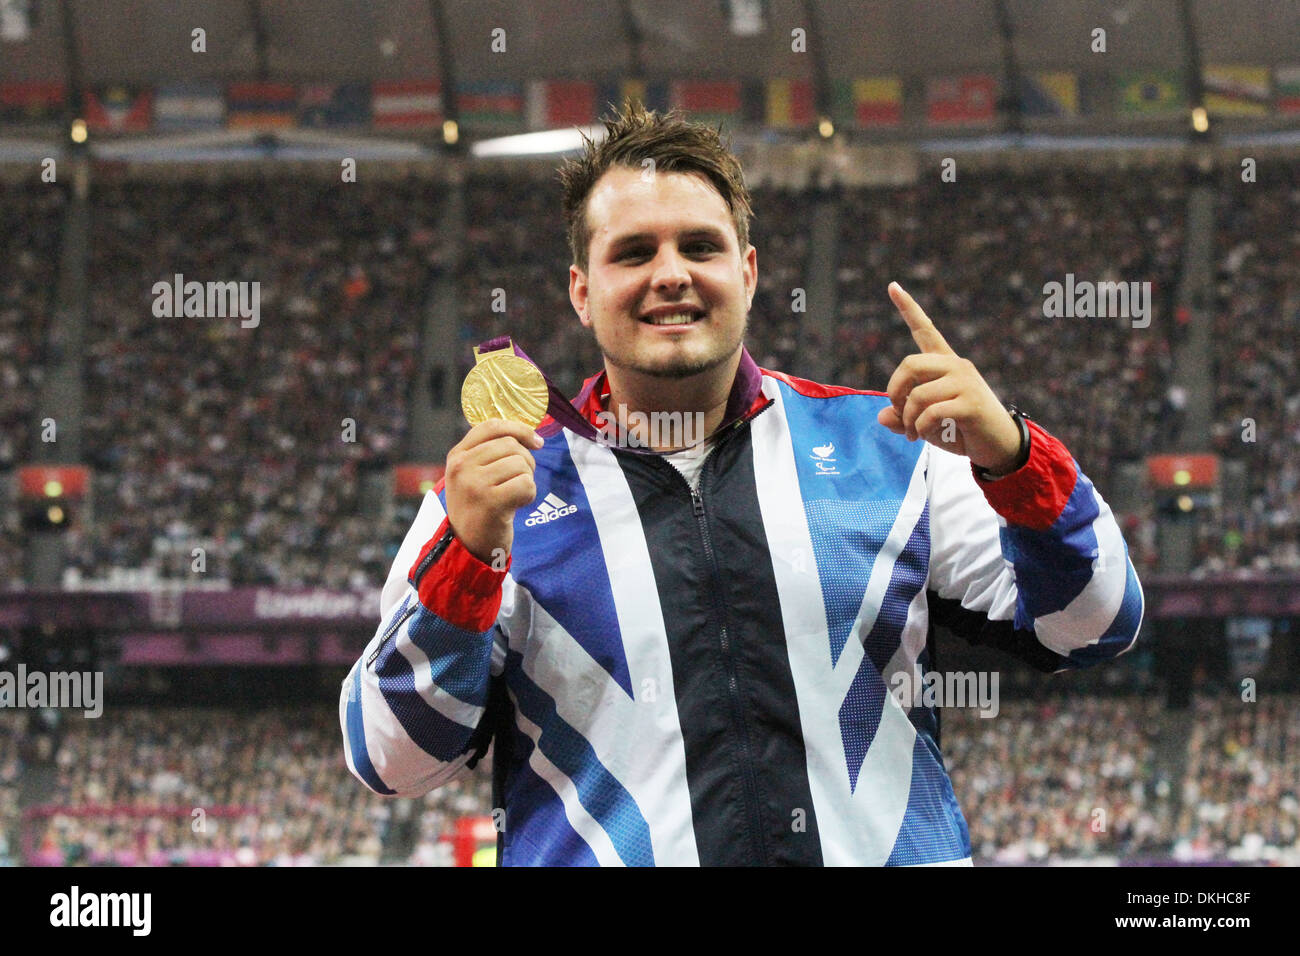 Aled Davies GB celebrates winning gold in the Men's Discus Throw - F42 at the London 2012 Paralympic games Stock Photo